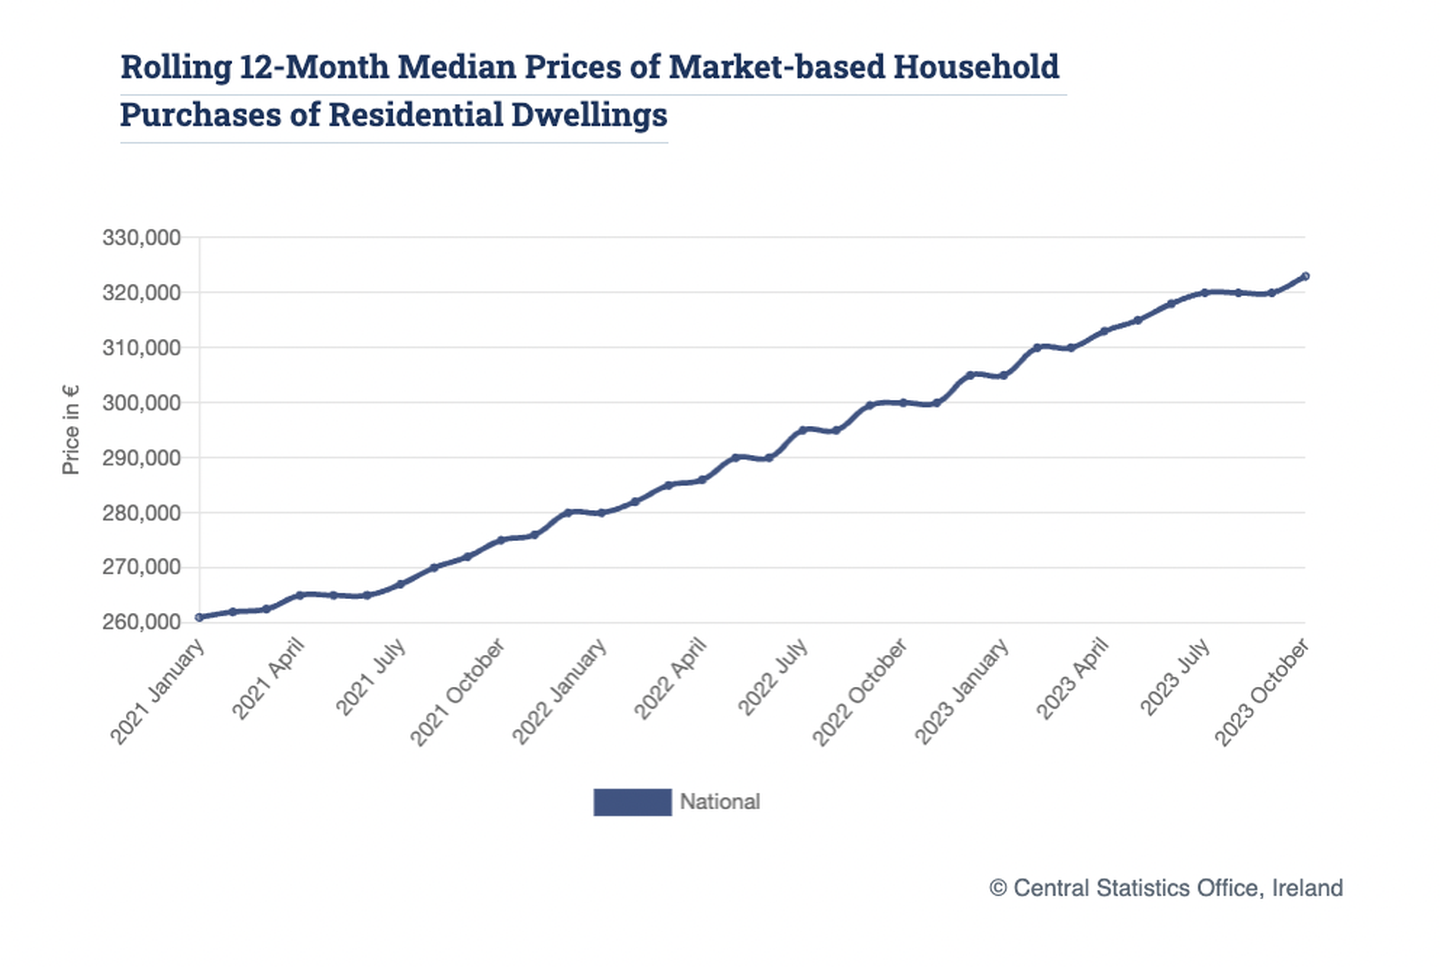 CSO 2023: Rolling 12-month median prices of market-based household purchases of residential dwellings. Graphic: Central Statistics Office, Ireland